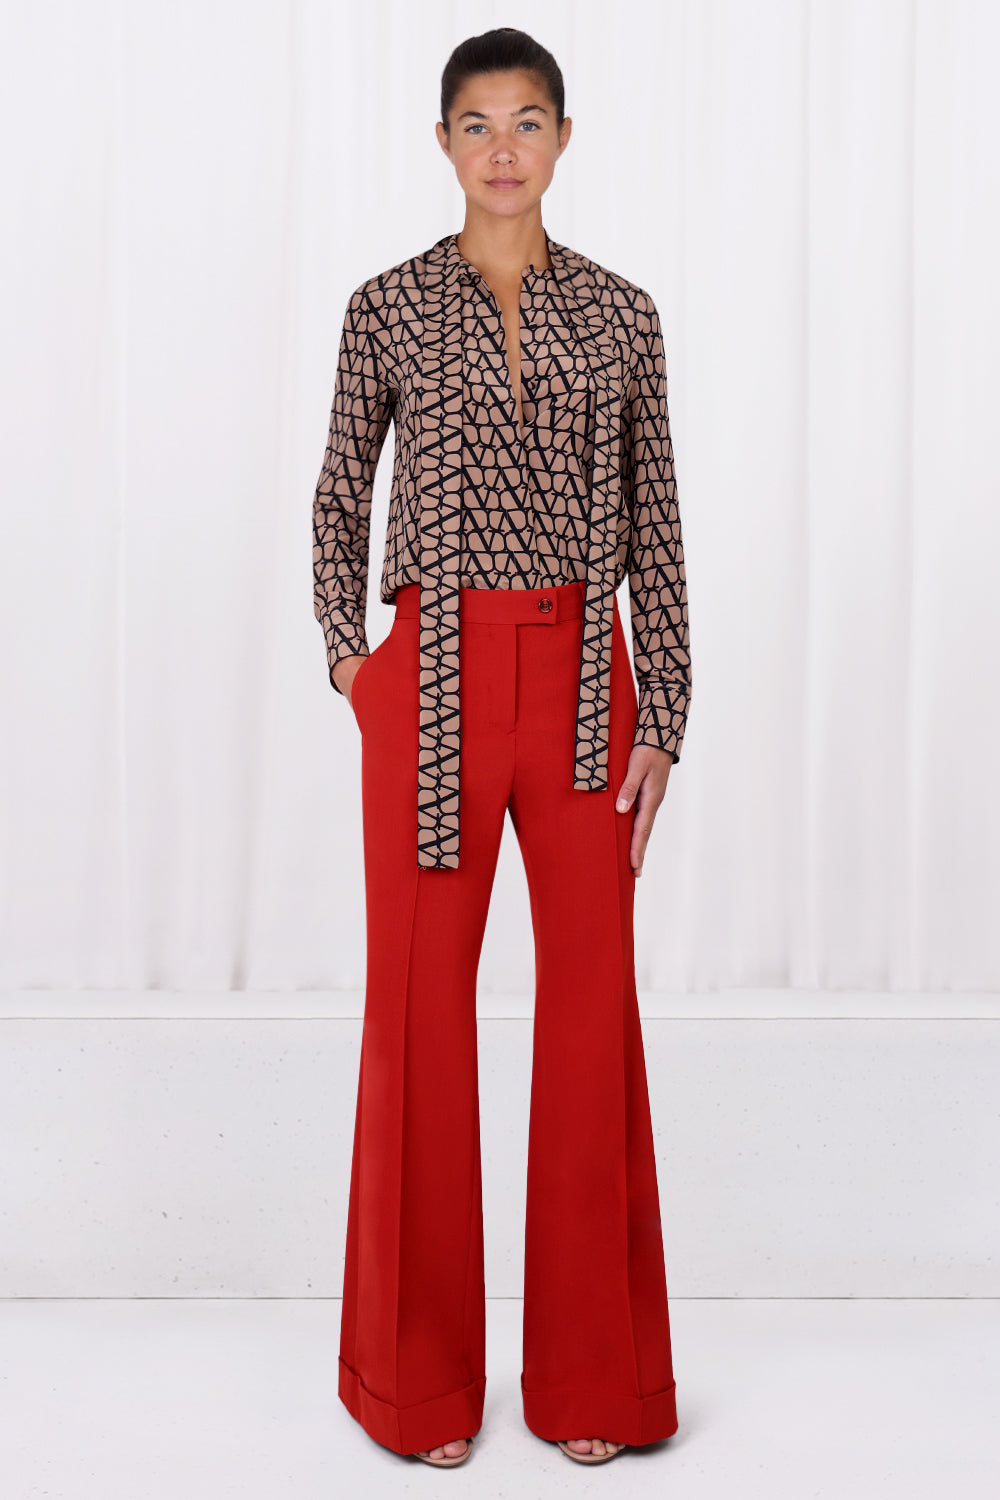 ACNE STUDIOS RTW PINNA TAILORED FLARED PANT | RED ACK